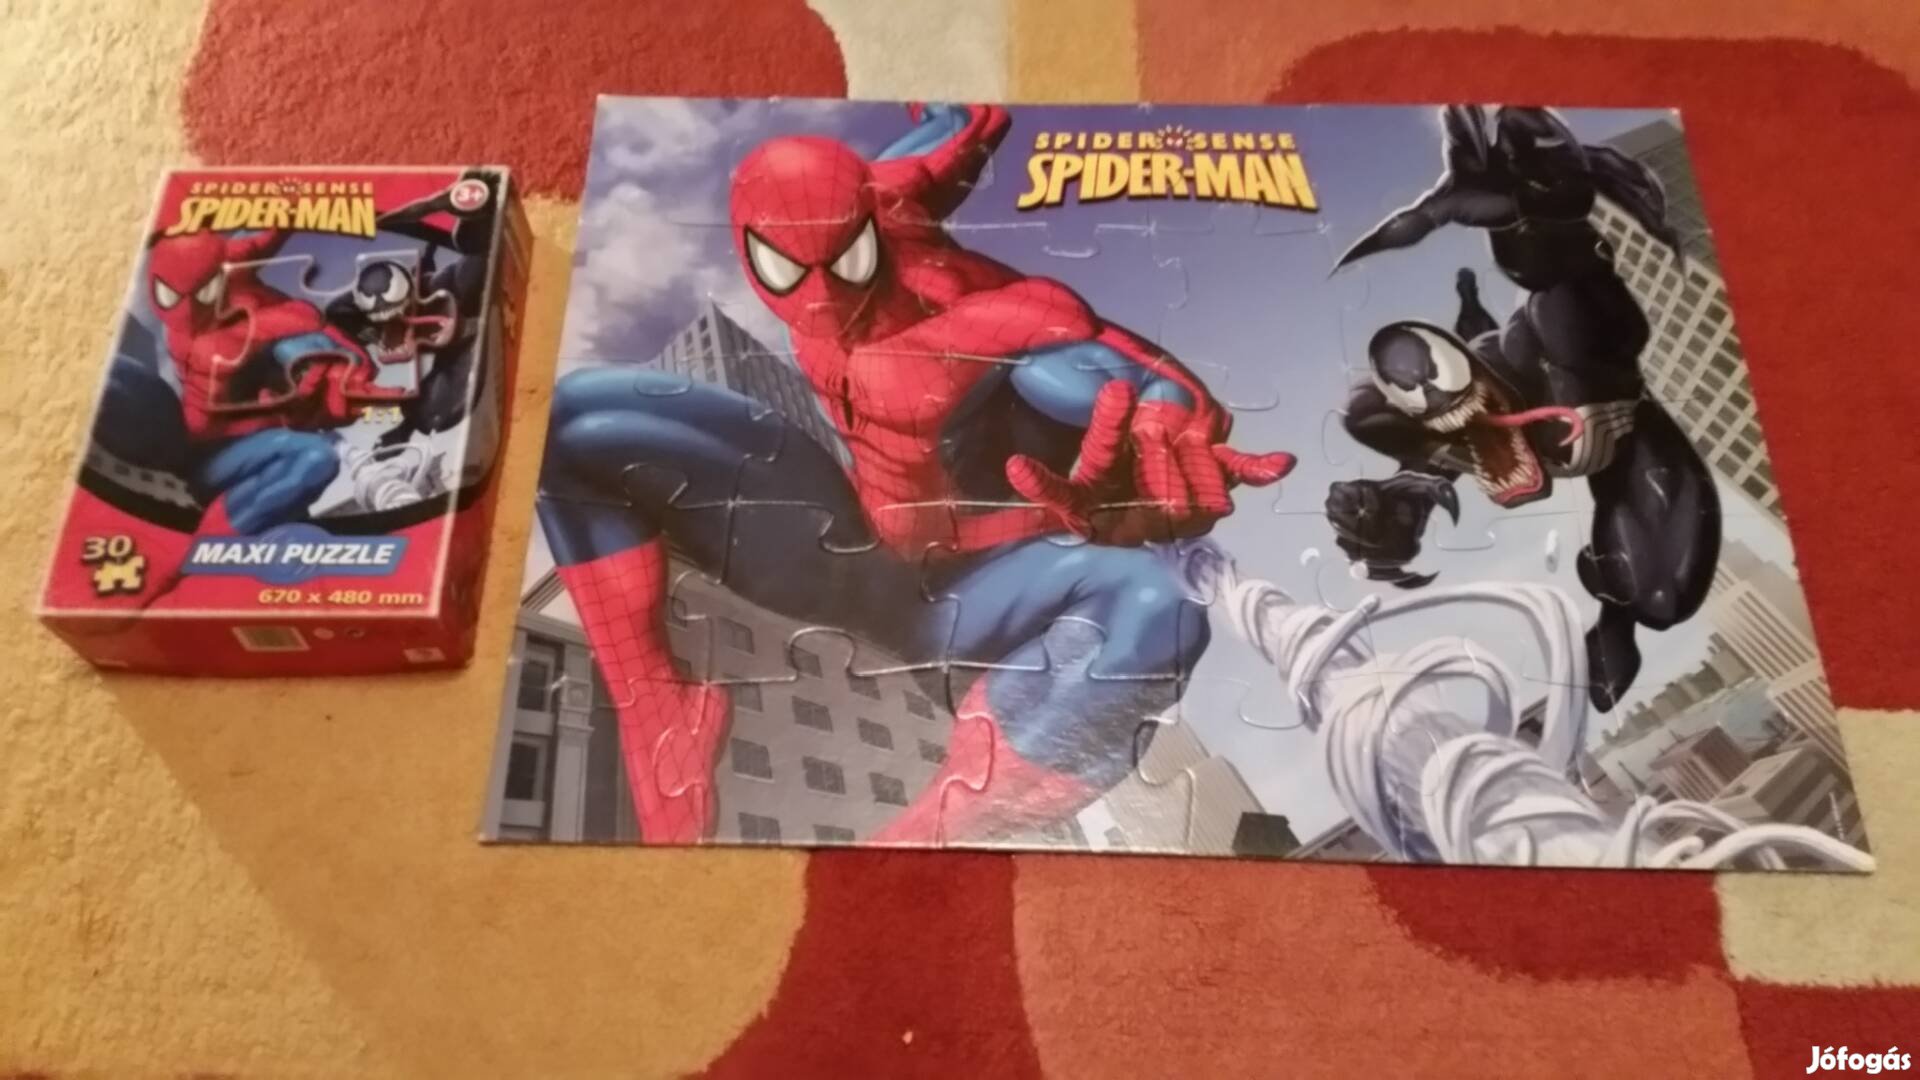 Spider man 30 db-os puzzle 